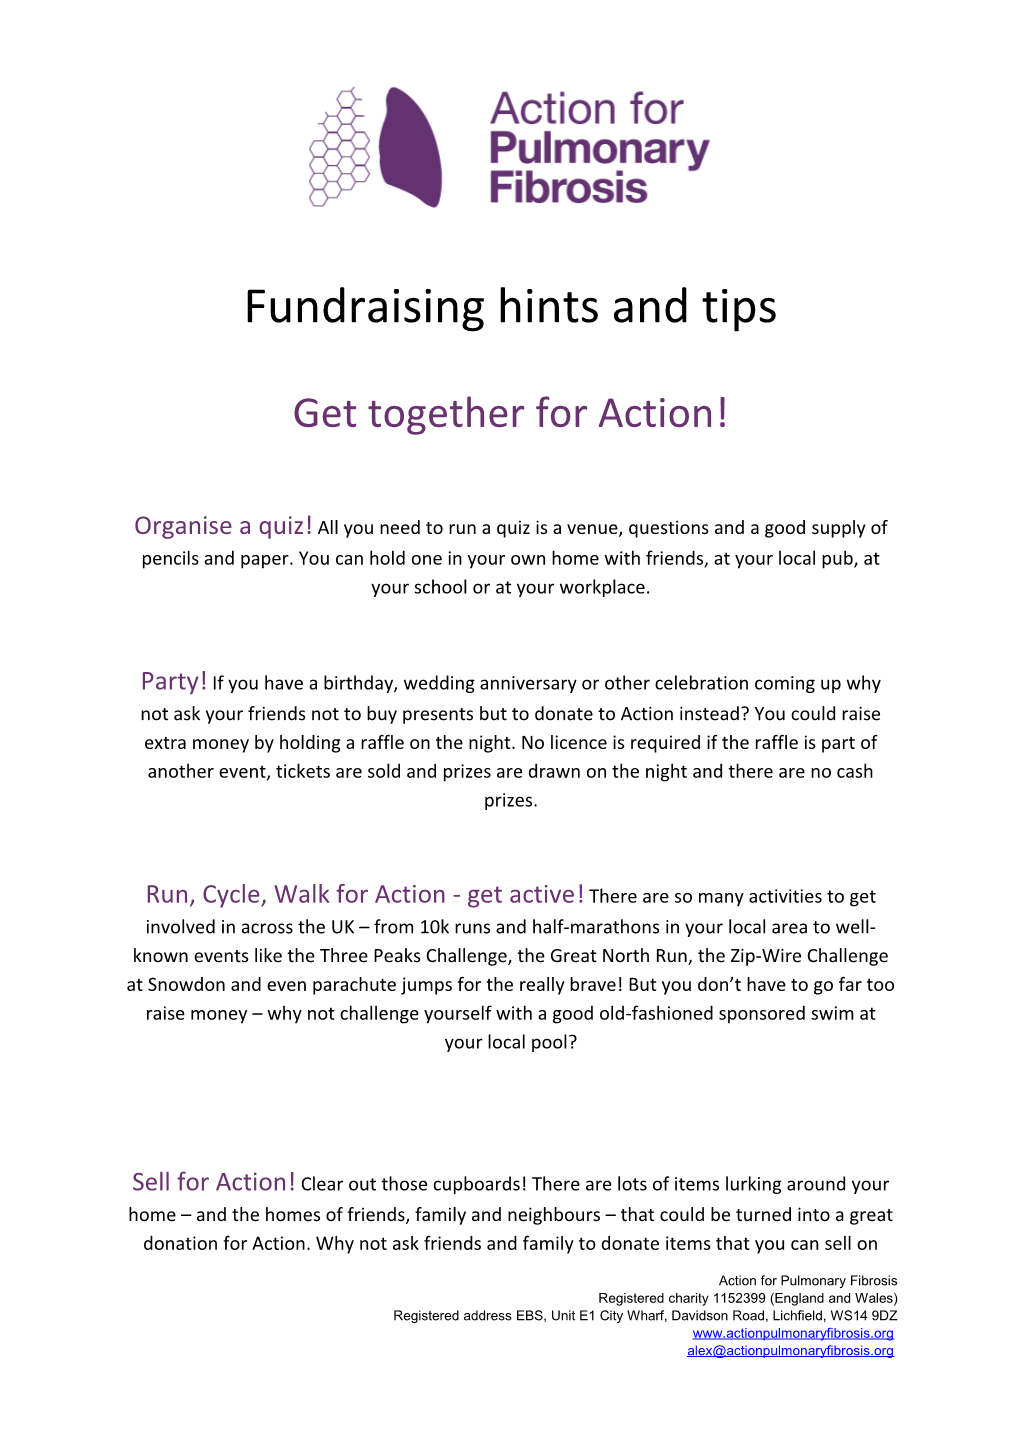 Fundraising Hints and Tips